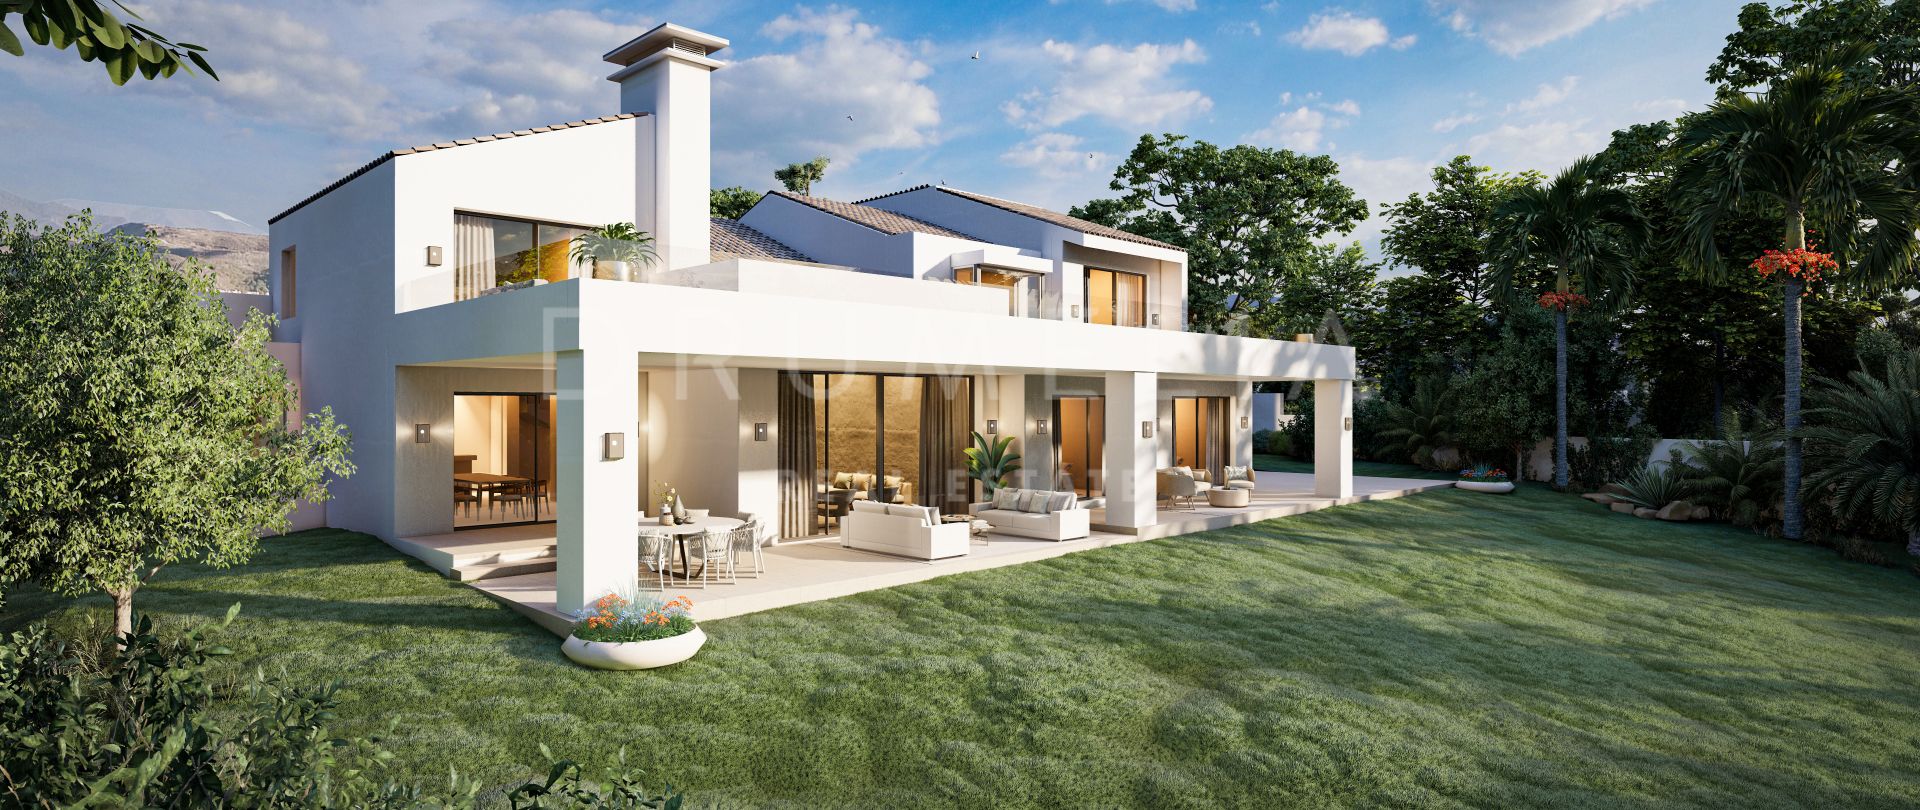 Luxurious Mediterranean villa with great potential and project in high-end Rio Real, Marbella East